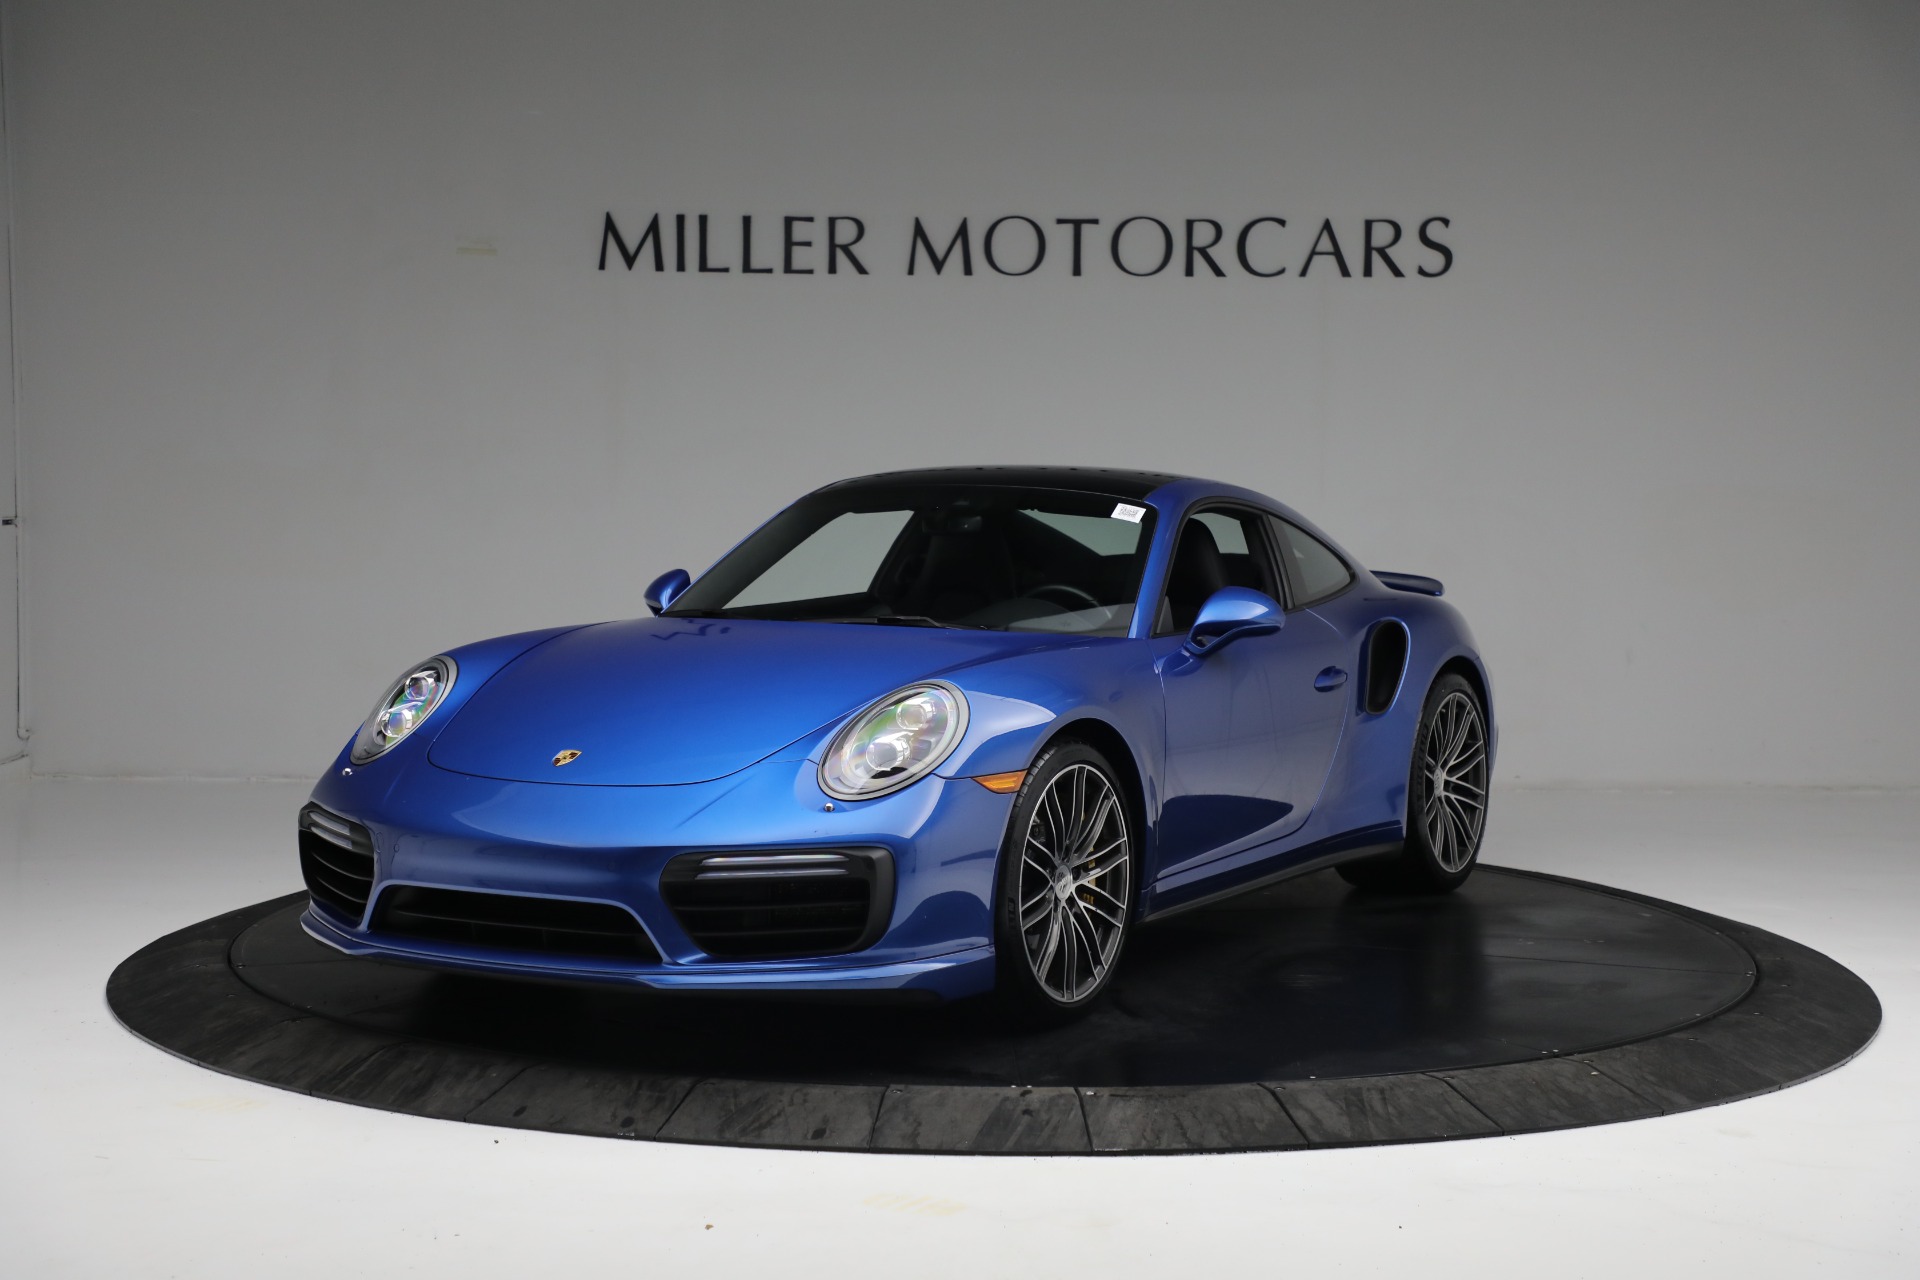 Used 2017 Porsche 911 Turbo S for sale $173,900 at Pagani of Greenwich in Greenwich CT 06830 1